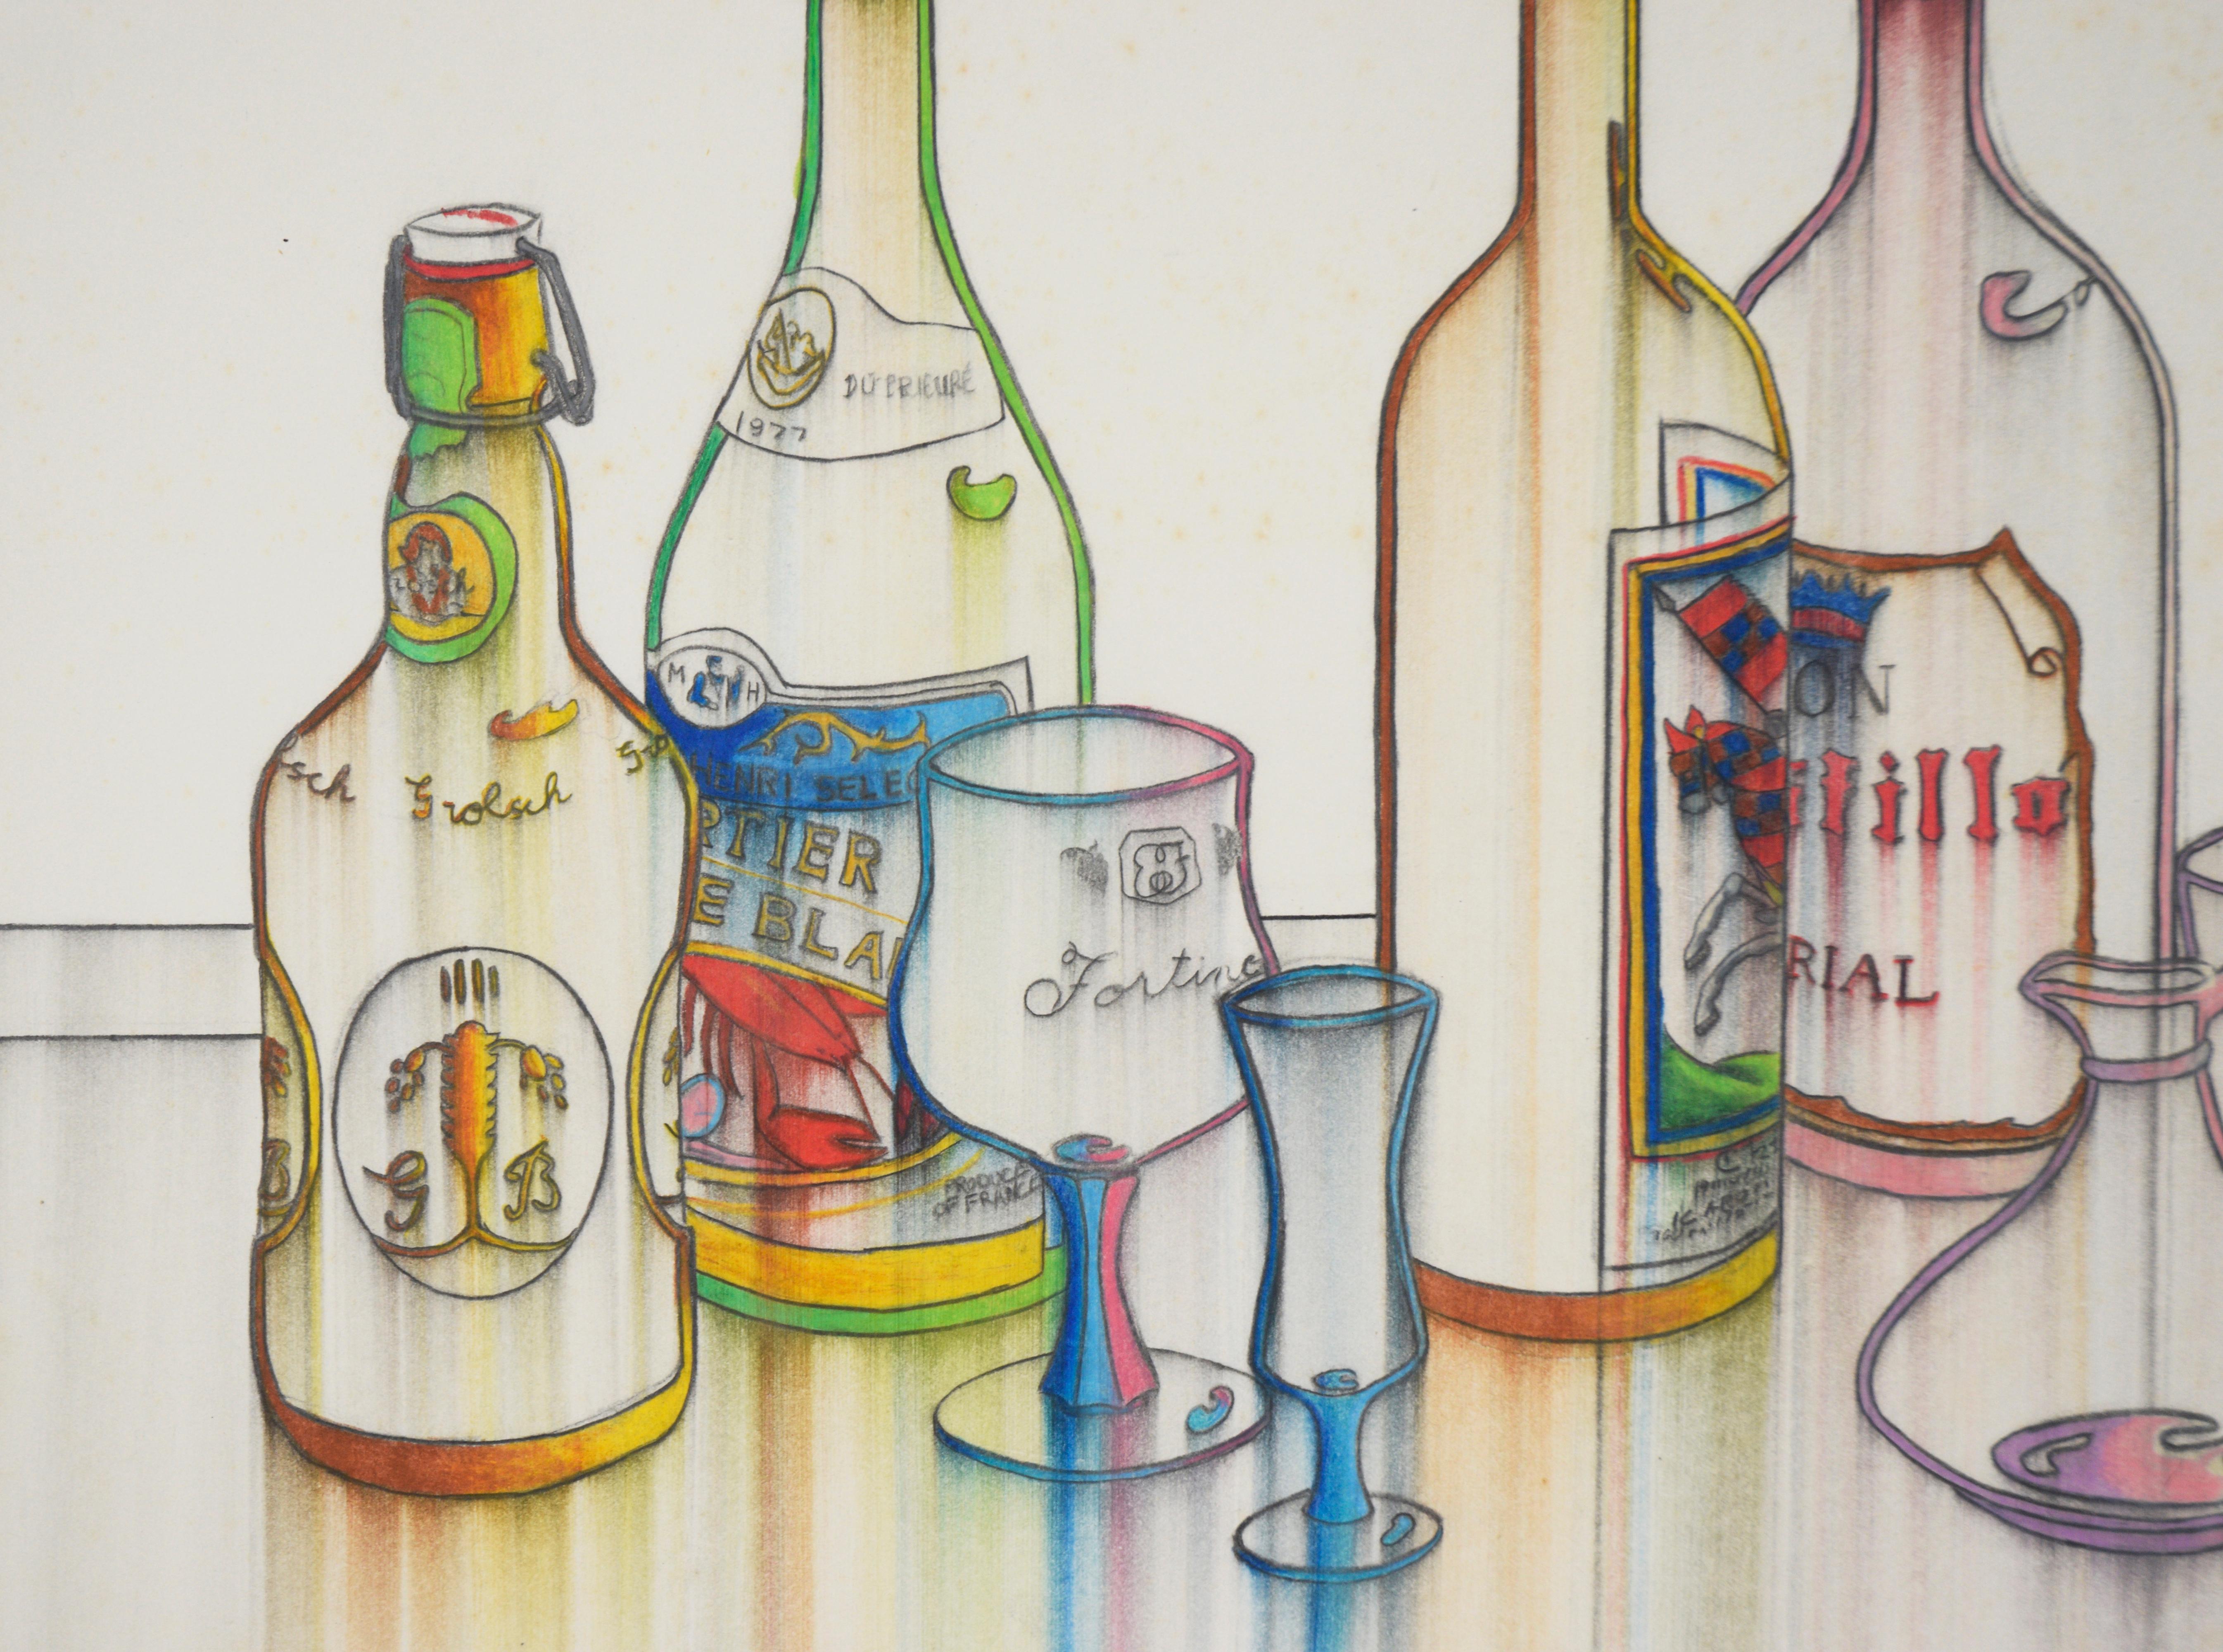 Oil Pastel and Pencil Liquor Still Life 

Oil pastel and pencil still life depicting a line up of Dutch liquor bottles and drinking glasses by Erin Pearce (American, 20th C). Liquor bottles are outlined in pencil while vibrant pastels color in the